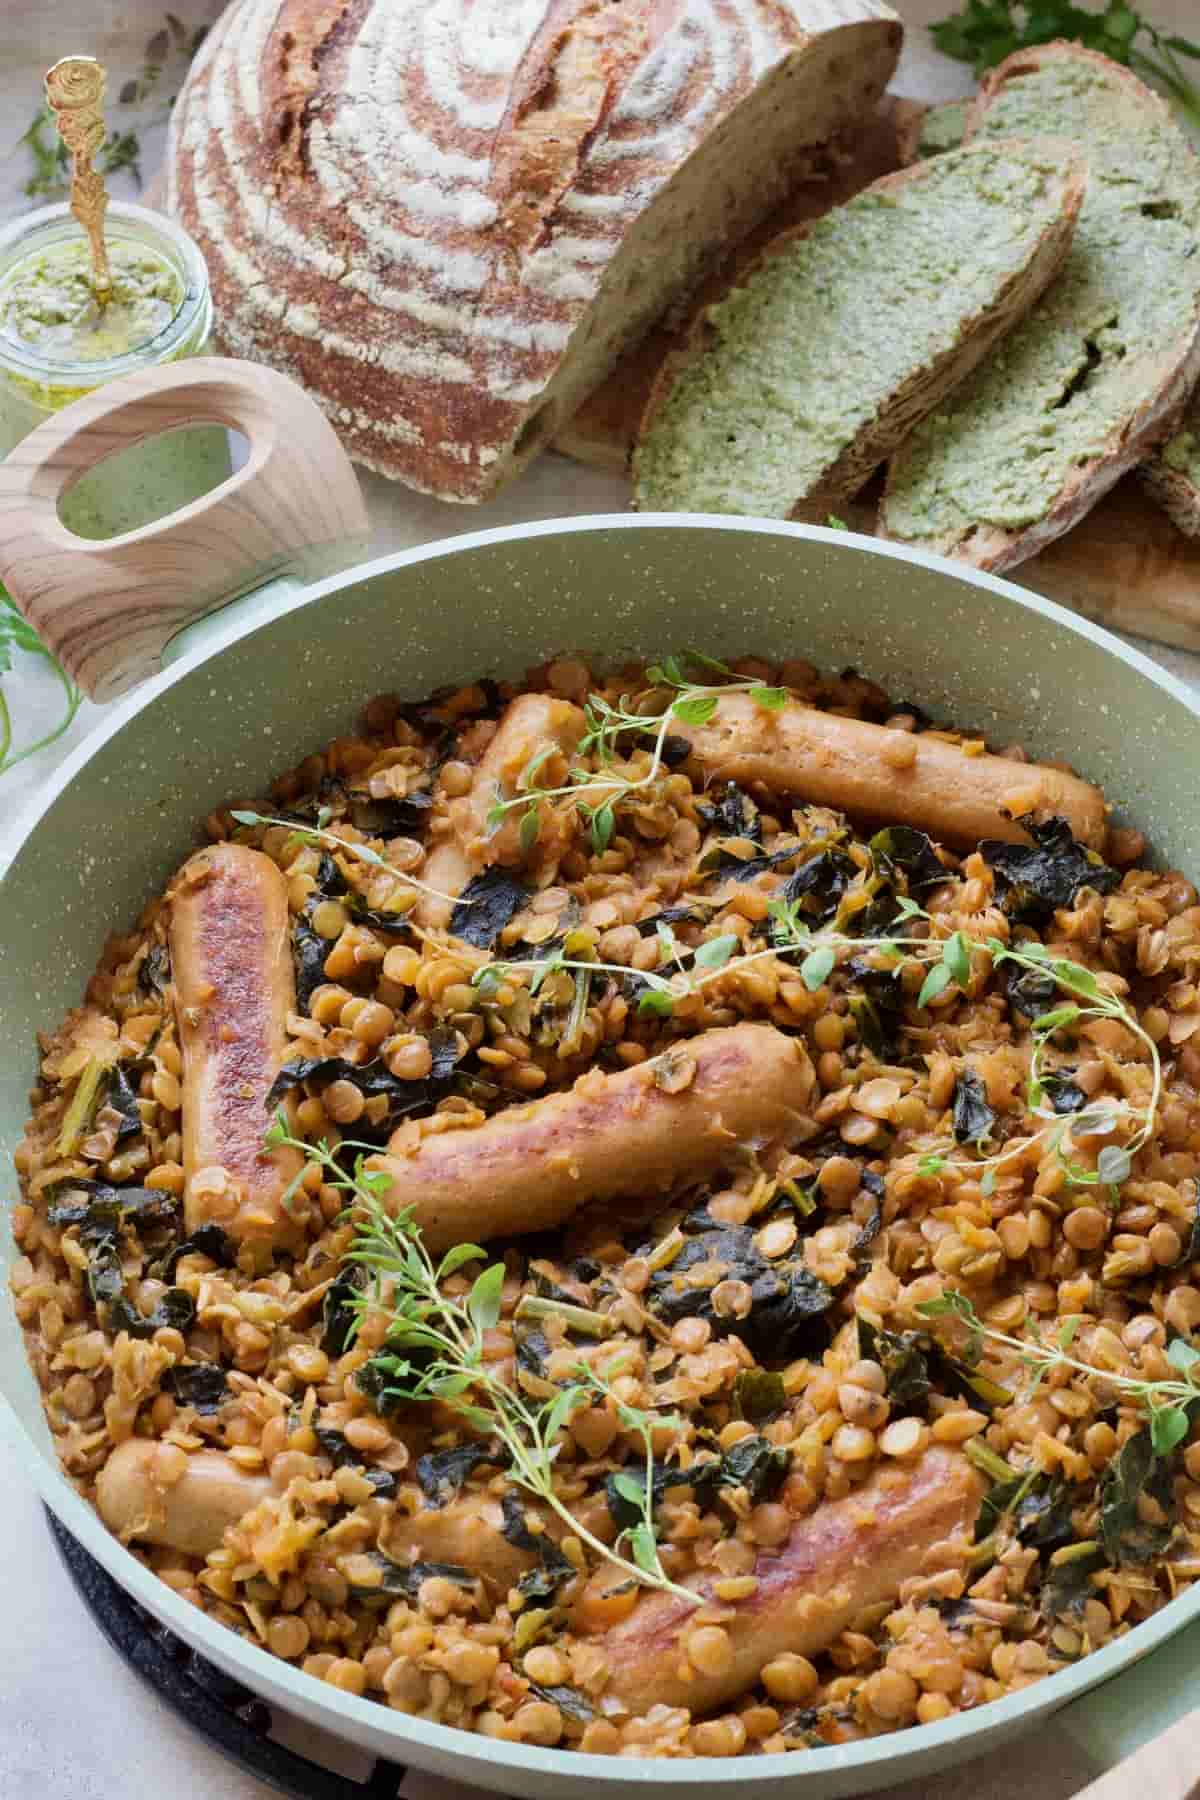 Pan with vegan sausage casserole, bread in the background.